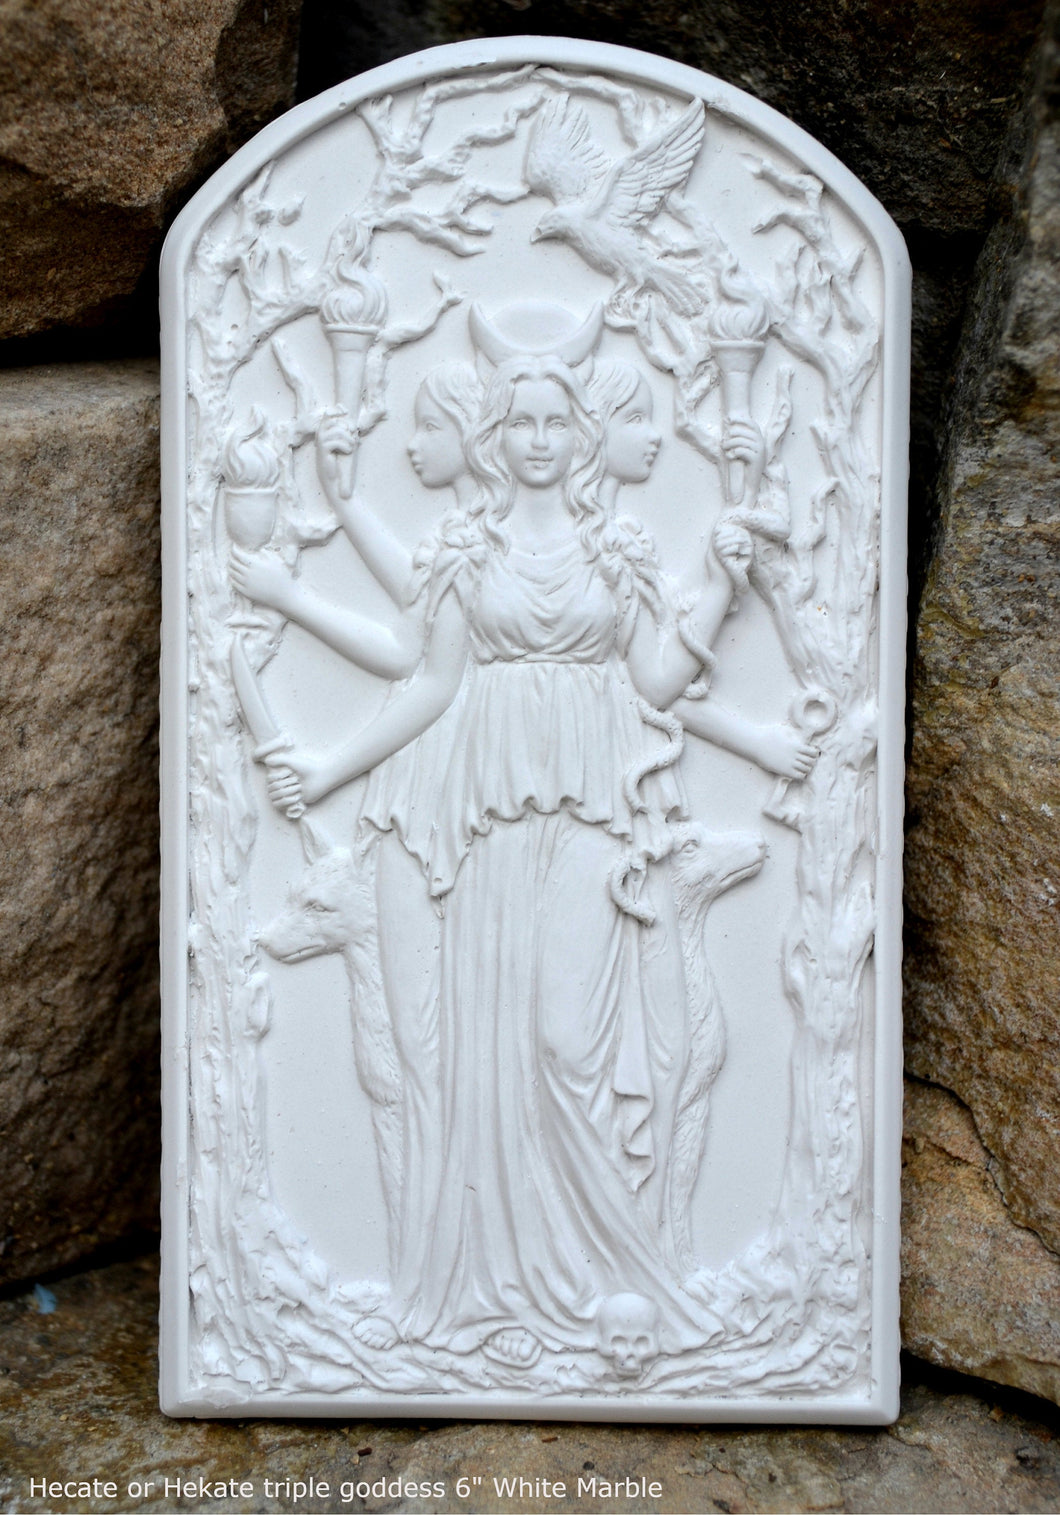 Hecate or Hekate triple goddess wall Sculpture www.Neo-Mfg.com 6" alter moon